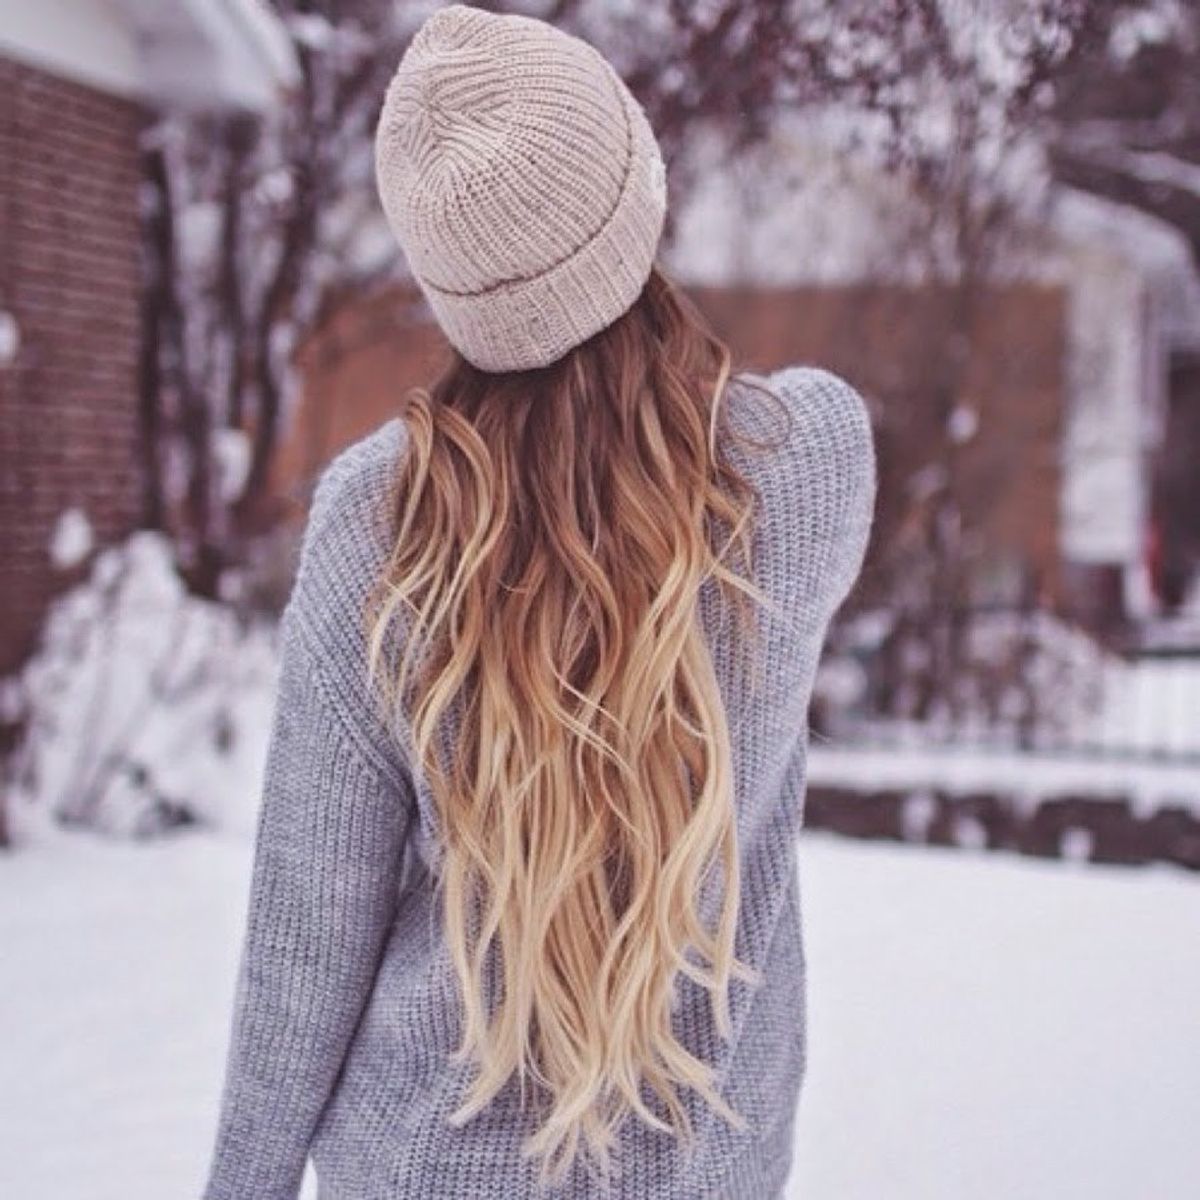 10 Things Every College Girl Needs in Her Winter Wardrobe